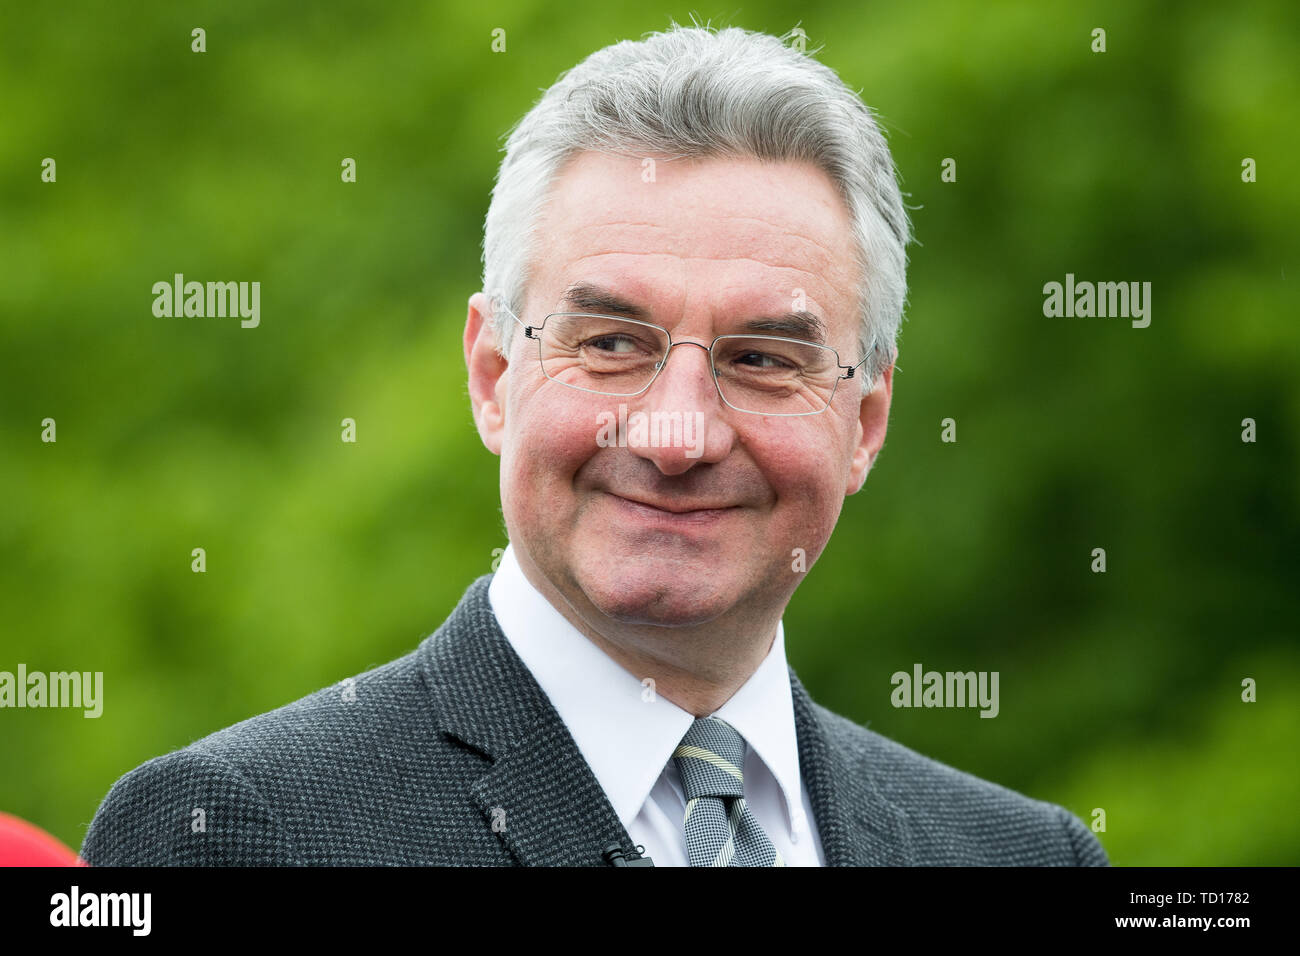 Jan Zahradil, President of the Alliance of Conservatives and Reformists in Europe ACRE in Warsaw, Poland. May 13th 2019 © Wojciech Strozyk / Alamy Sto Stock Photo